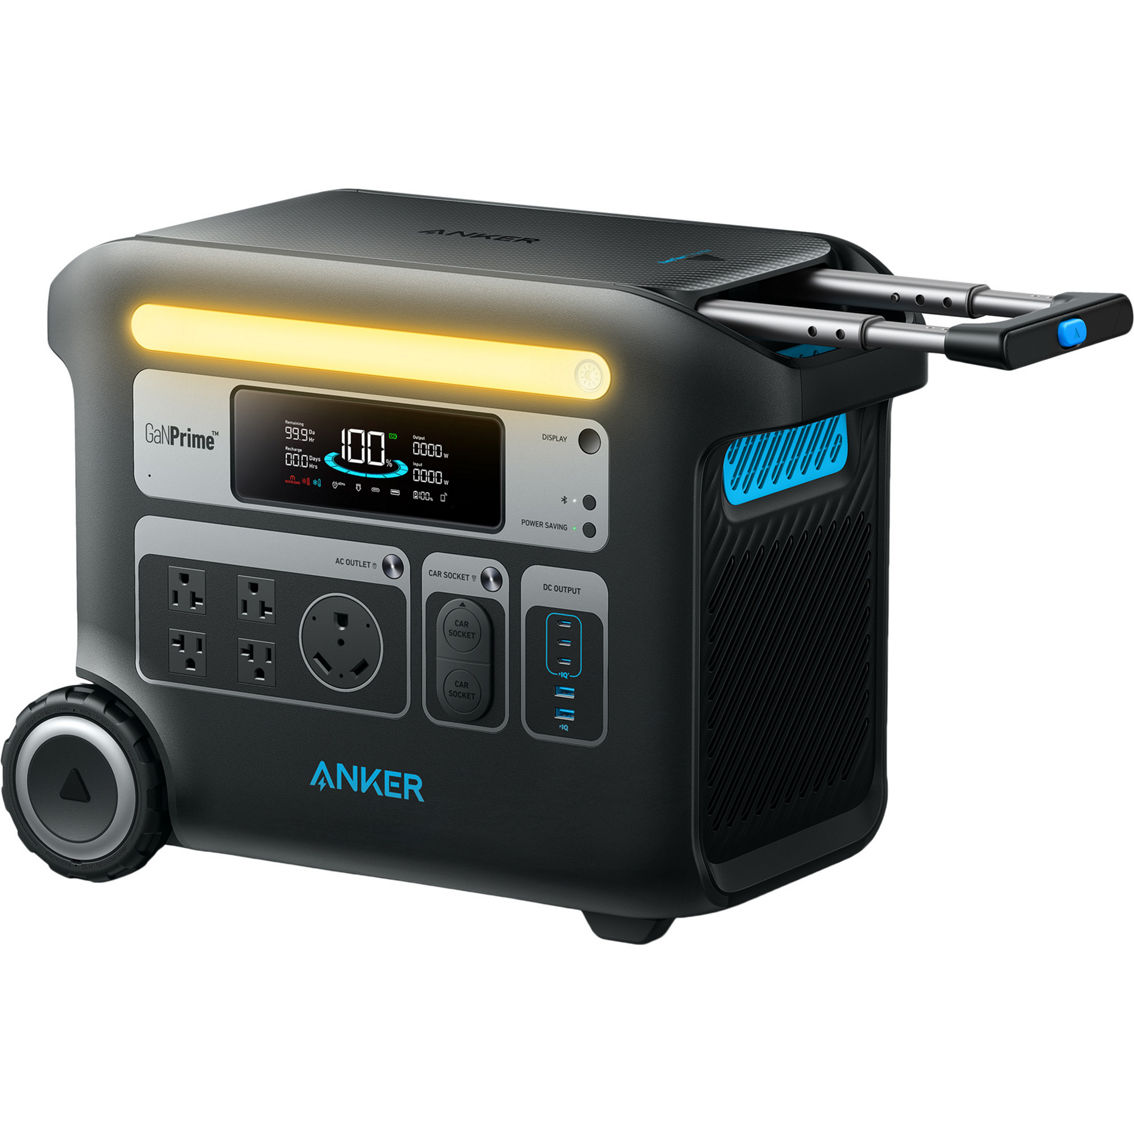 Anker 767 Portable Power Station Powerhouse 2048Wh - Image 1 of 2